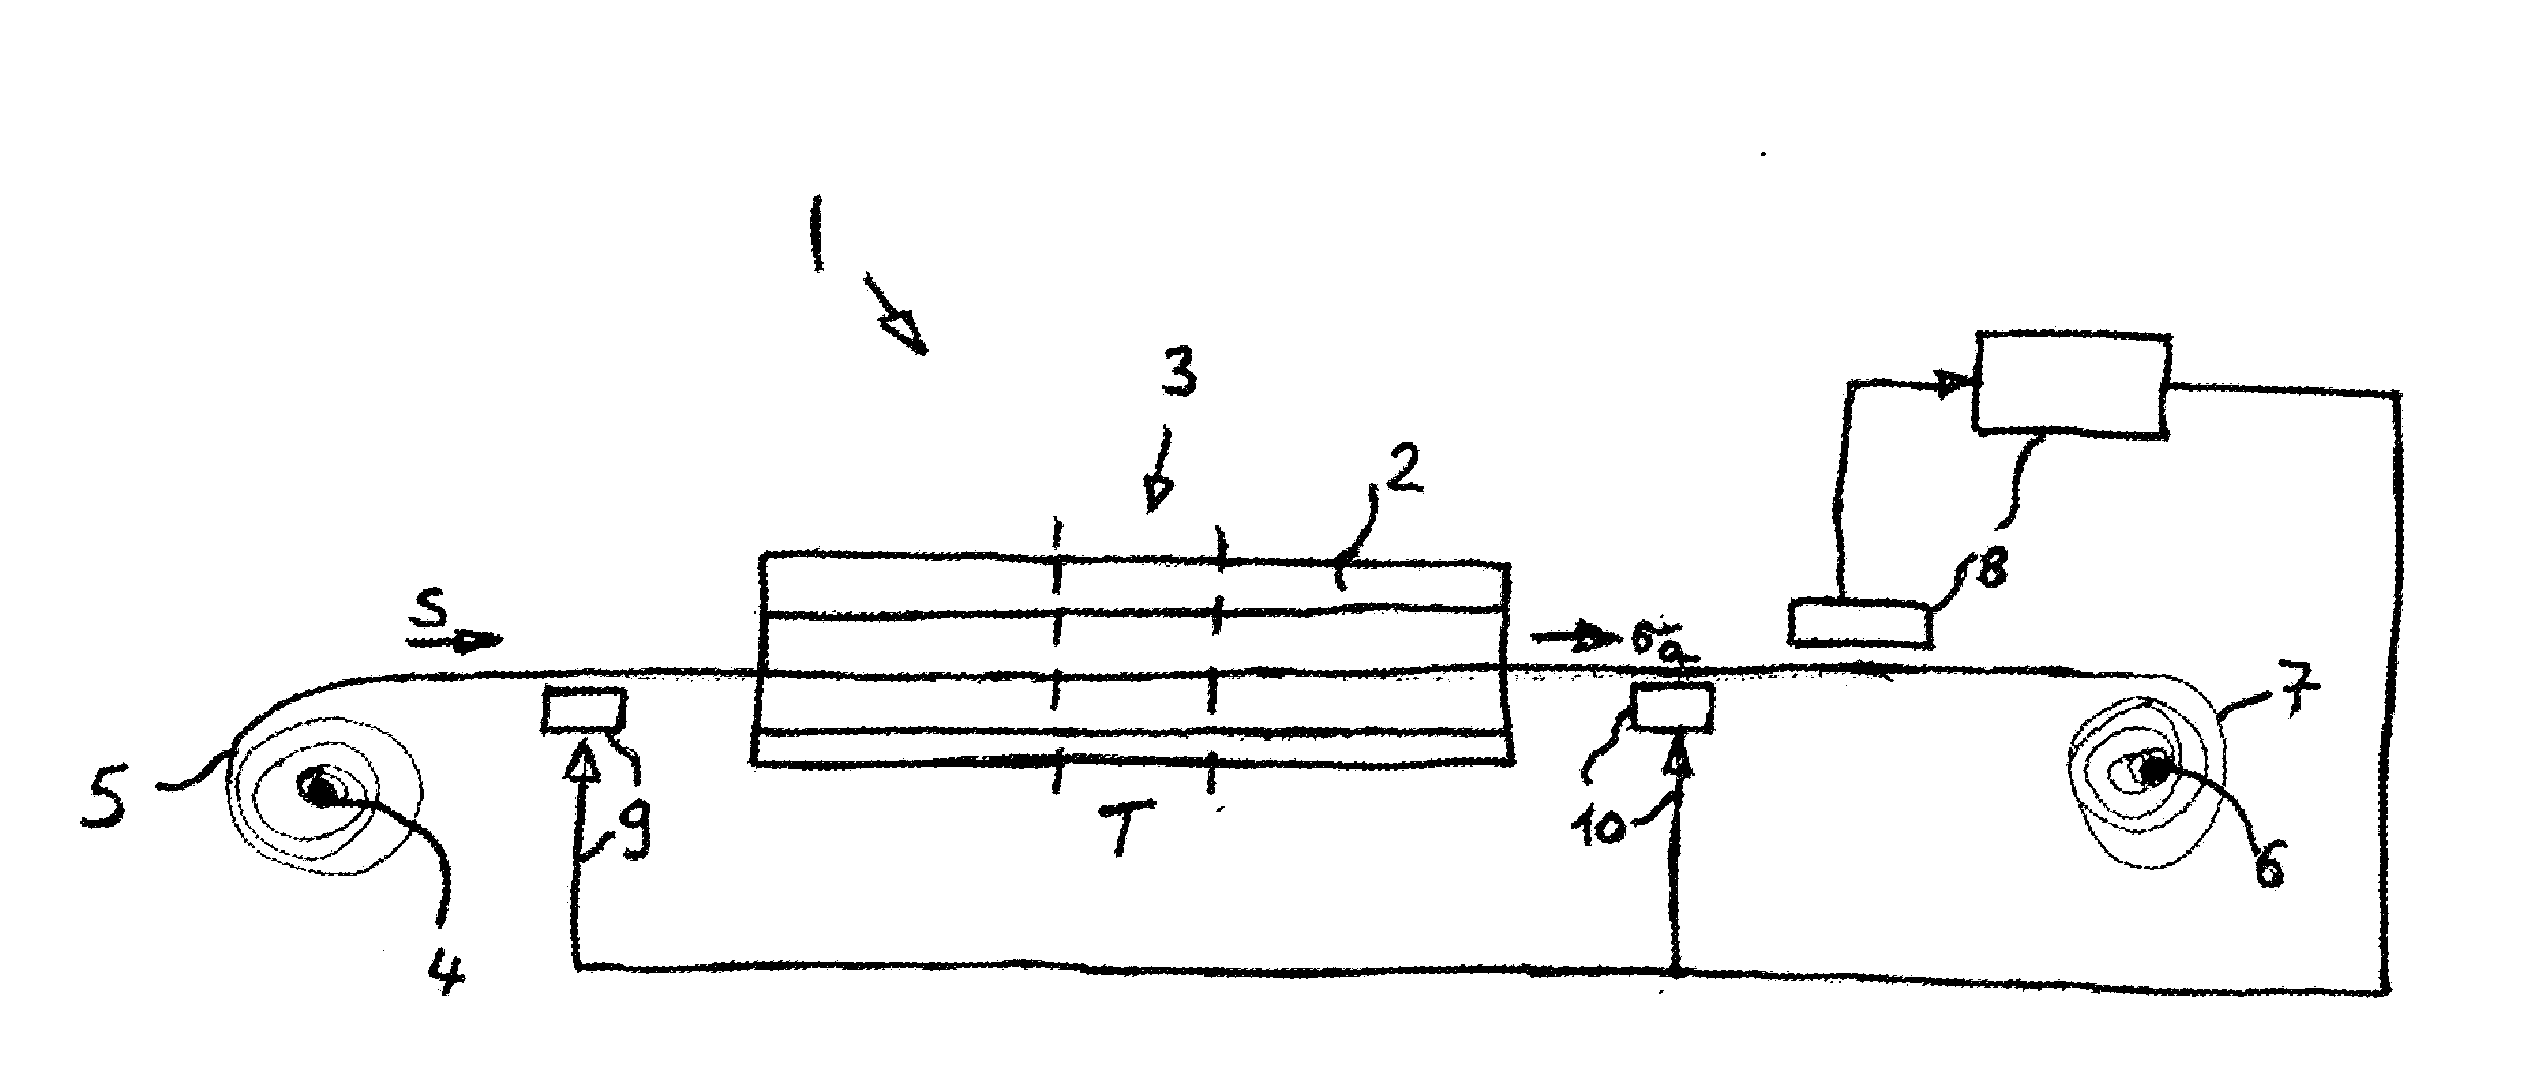 Alloy, magnet core and method for producing a strip from an alloy